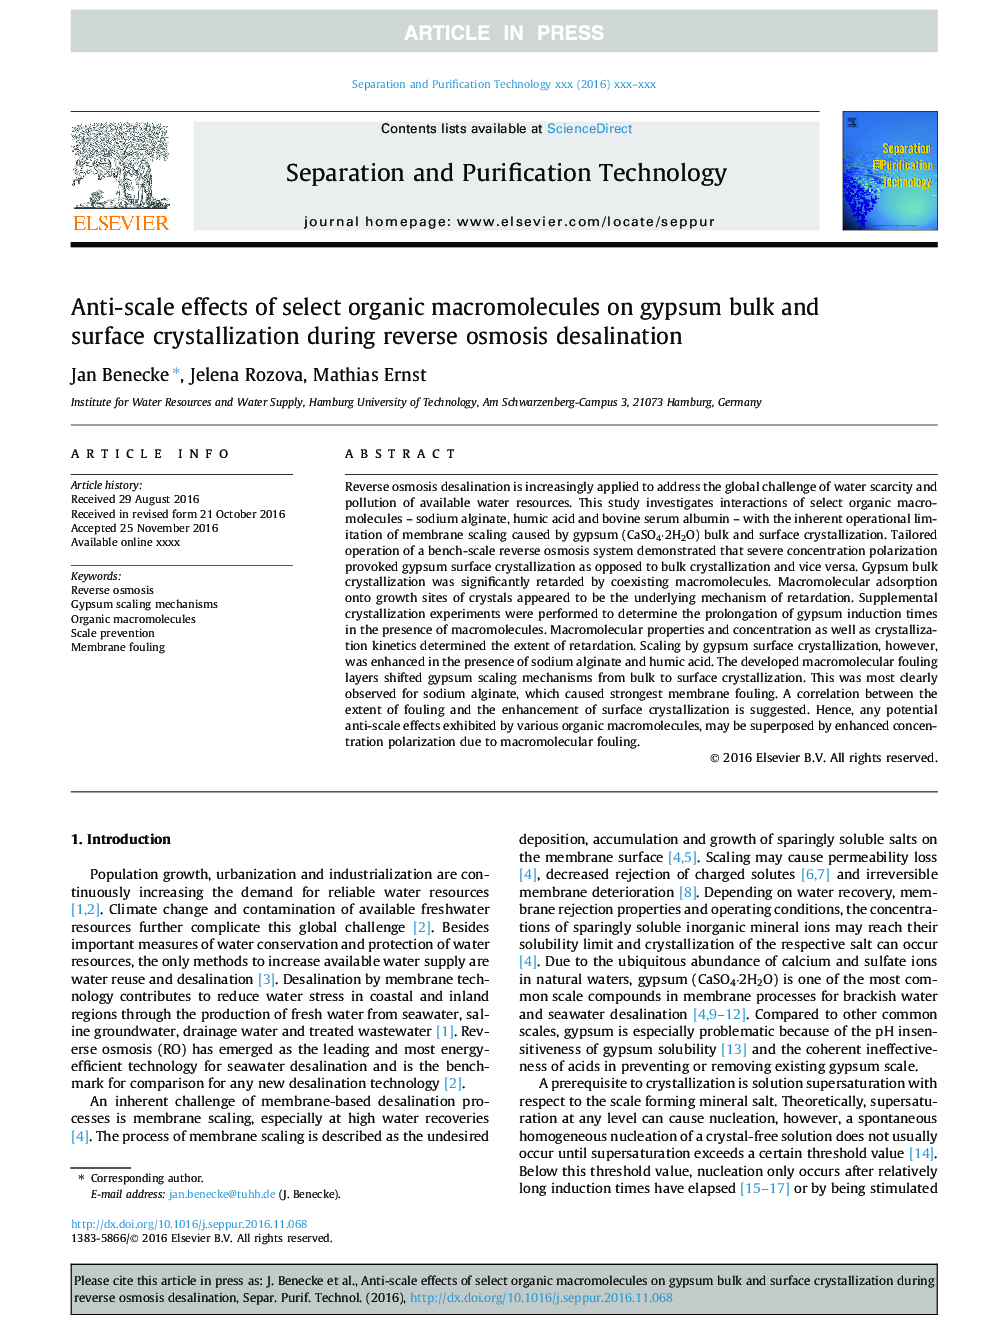 Anti-scale effects of select organic macromolecules on gypsum bulk and surface crystallization during reverse osmosis desalination